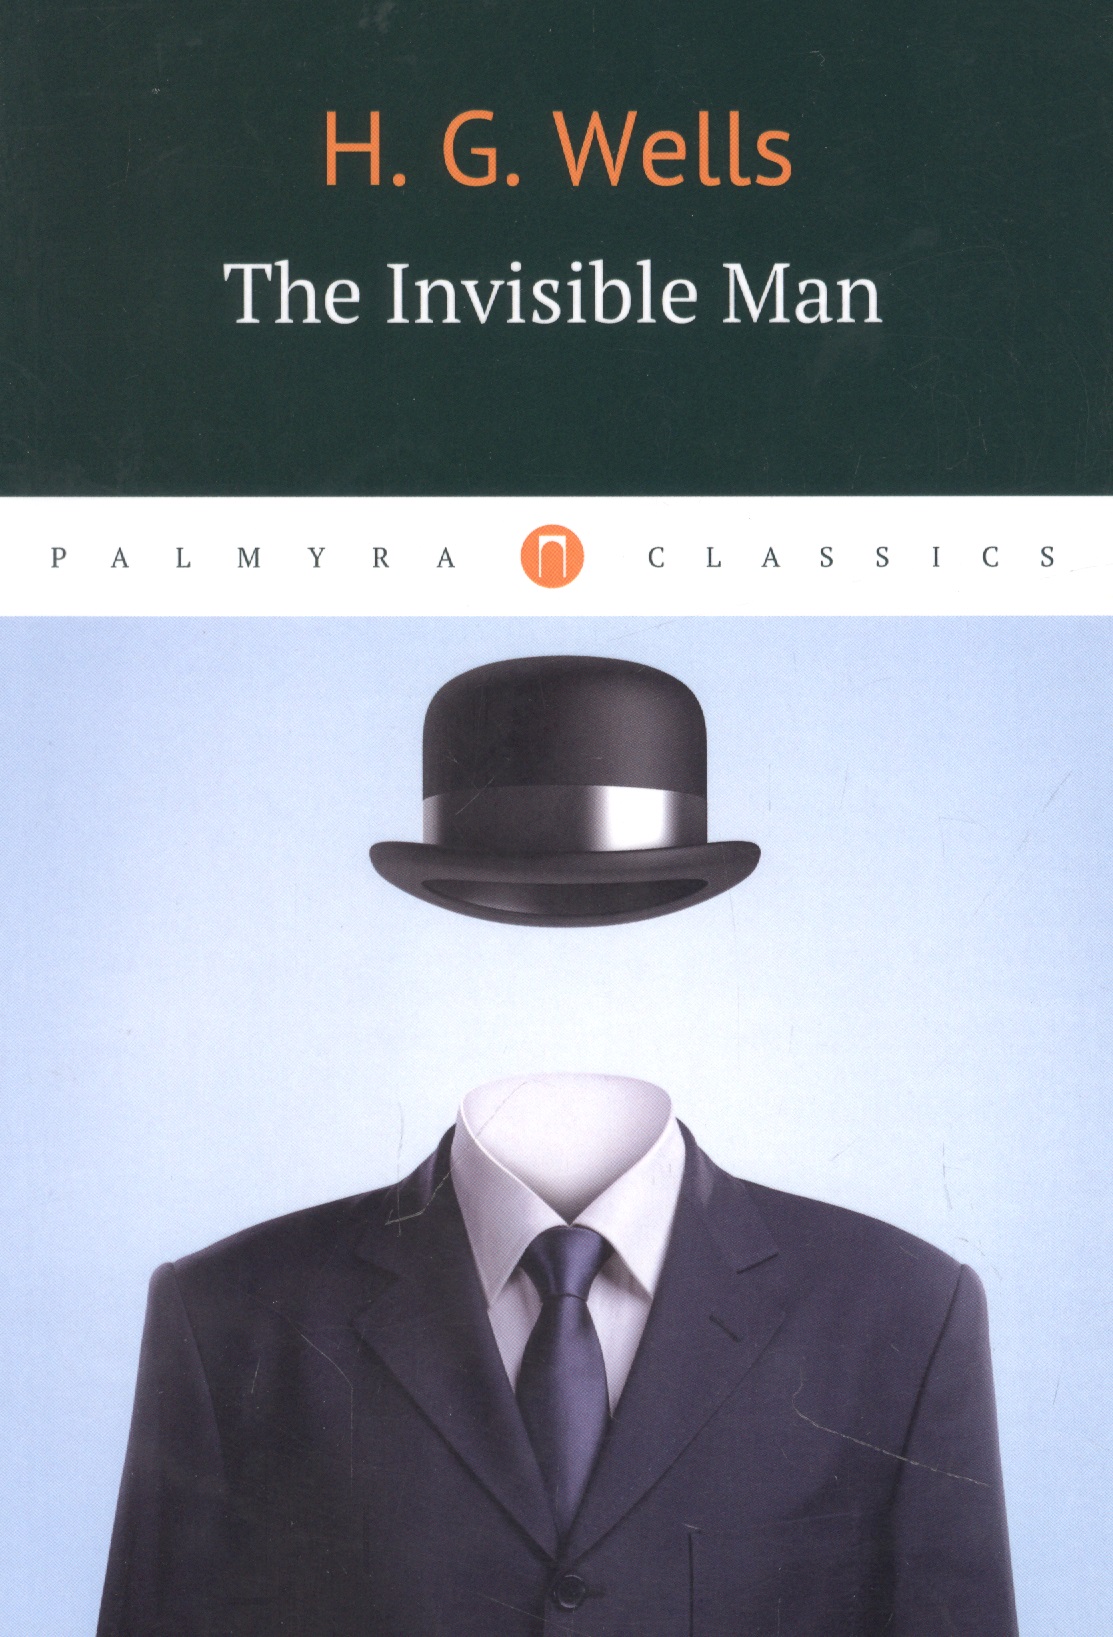 The Invisible Man wells herbert george the island of doctor moreau